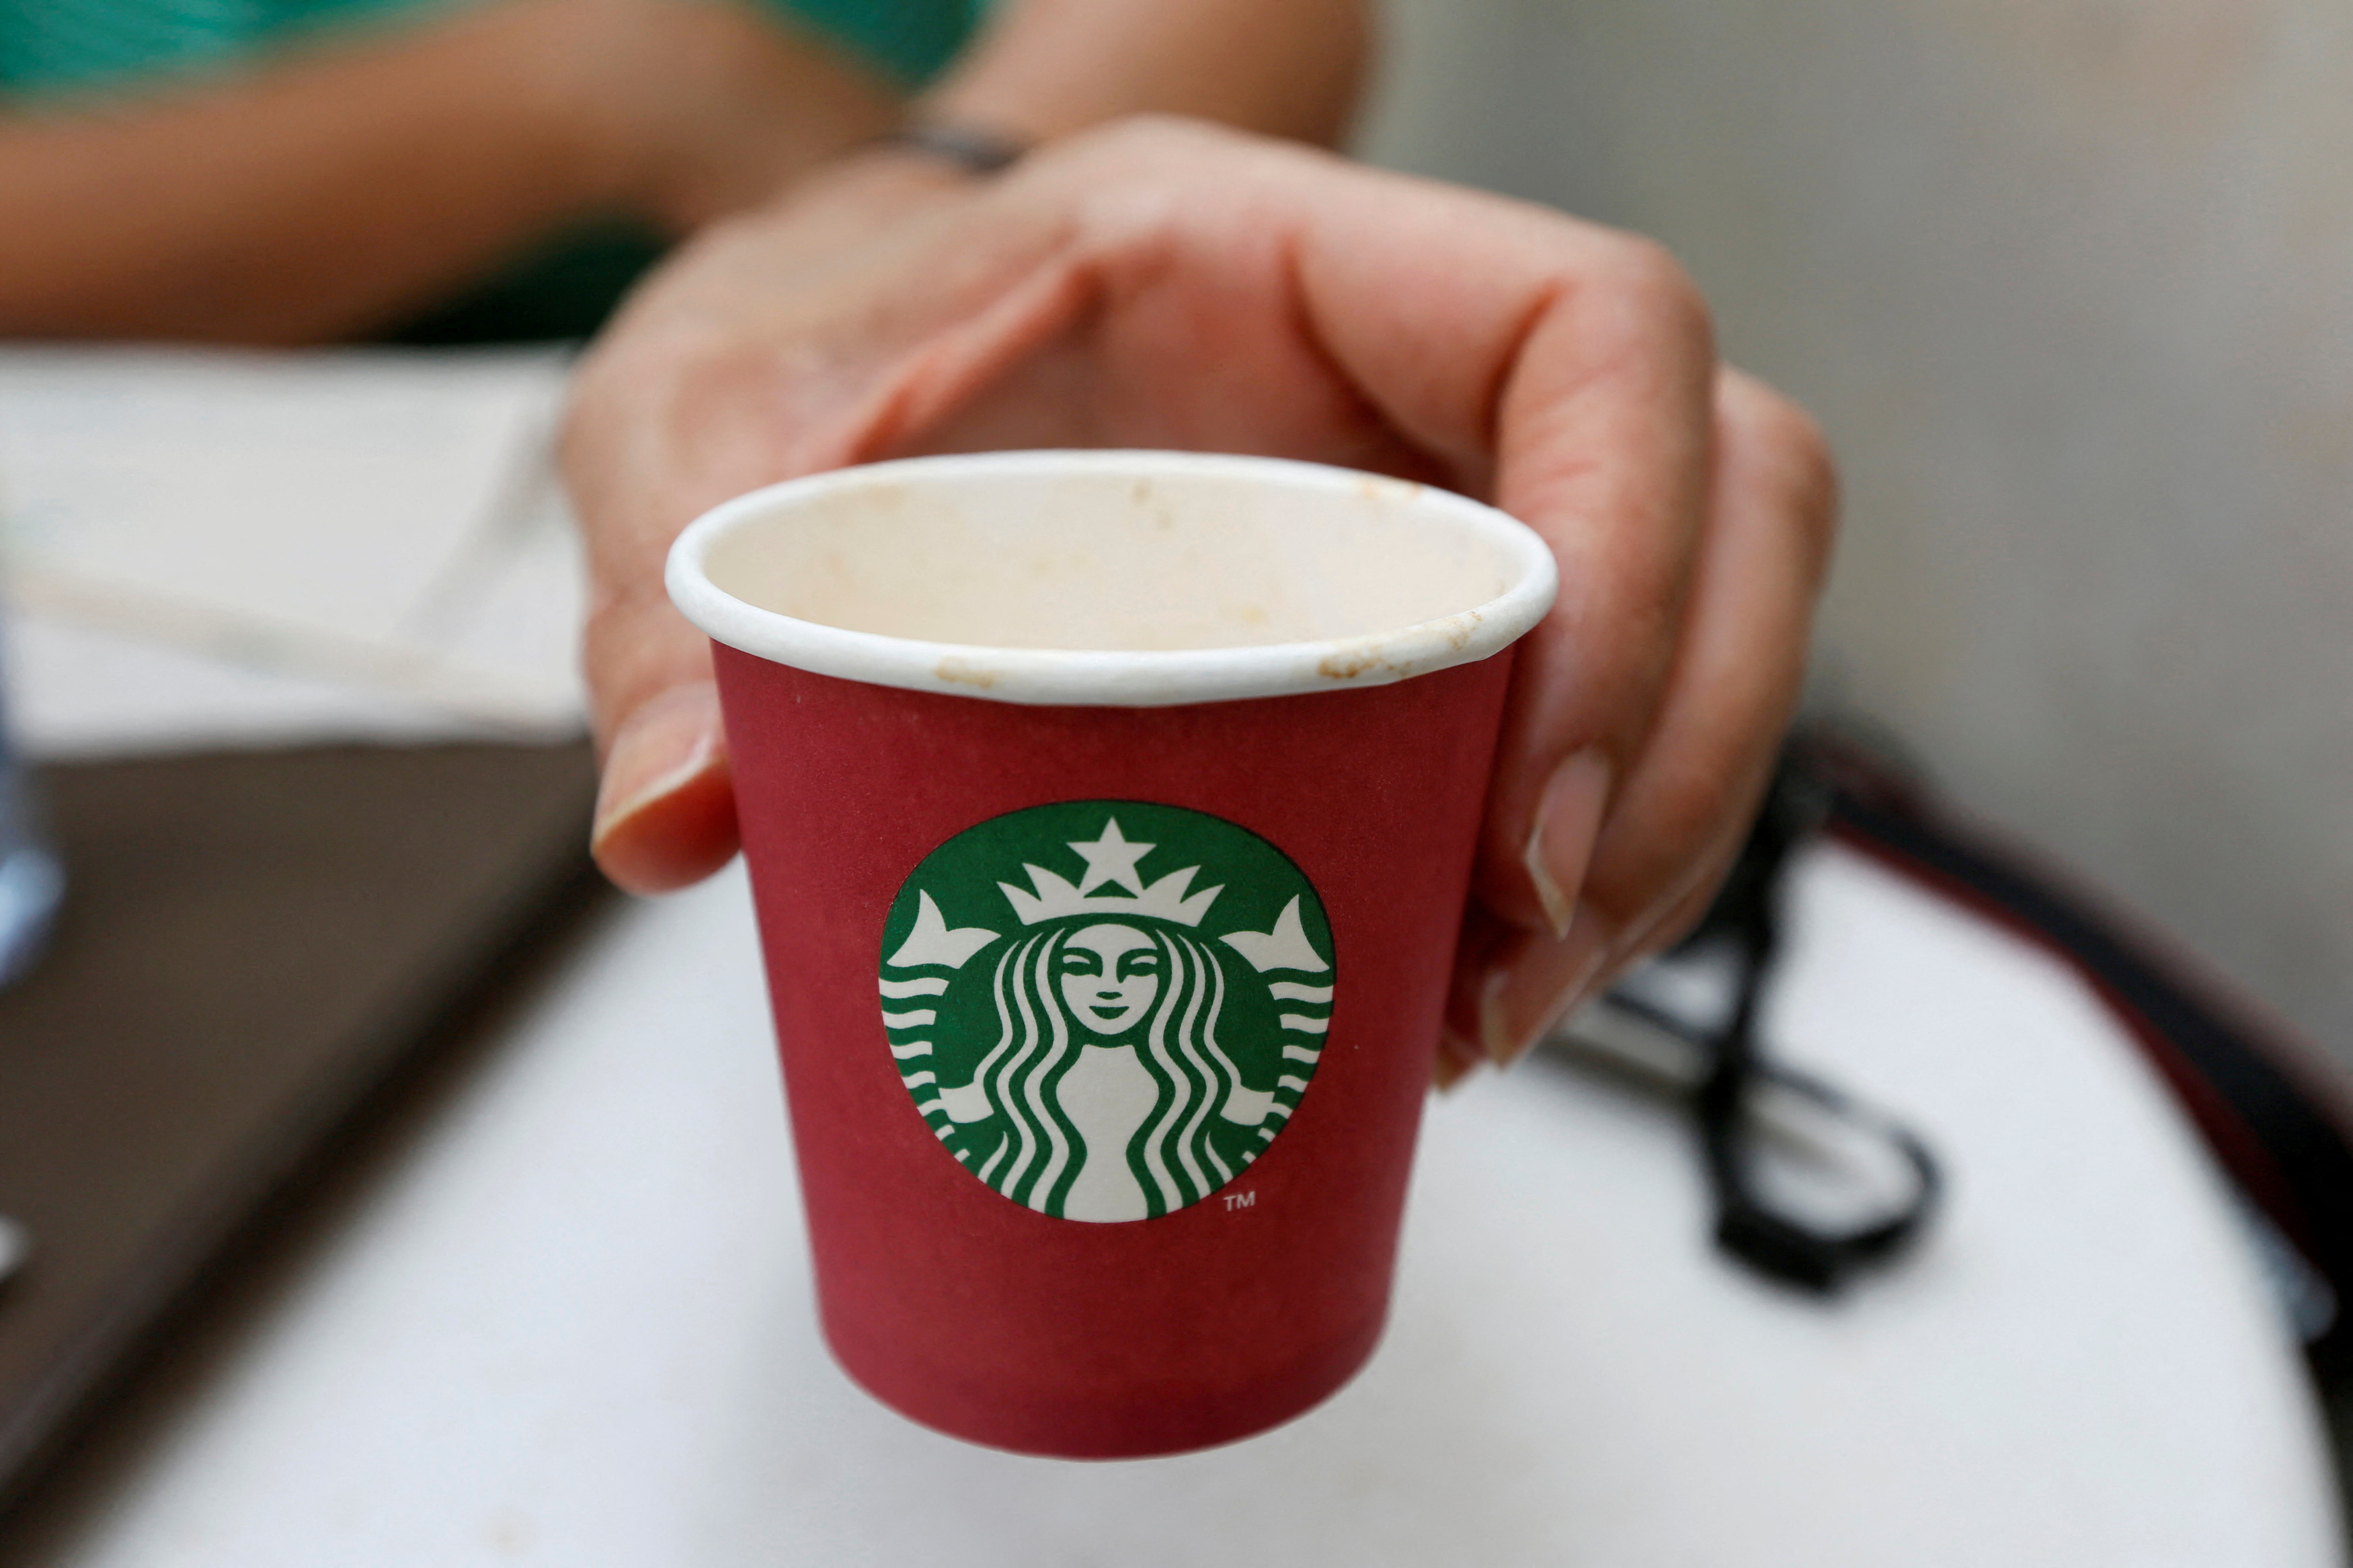 A woman displays a red Starbucks cup at a Starbucks cafe in Beirut